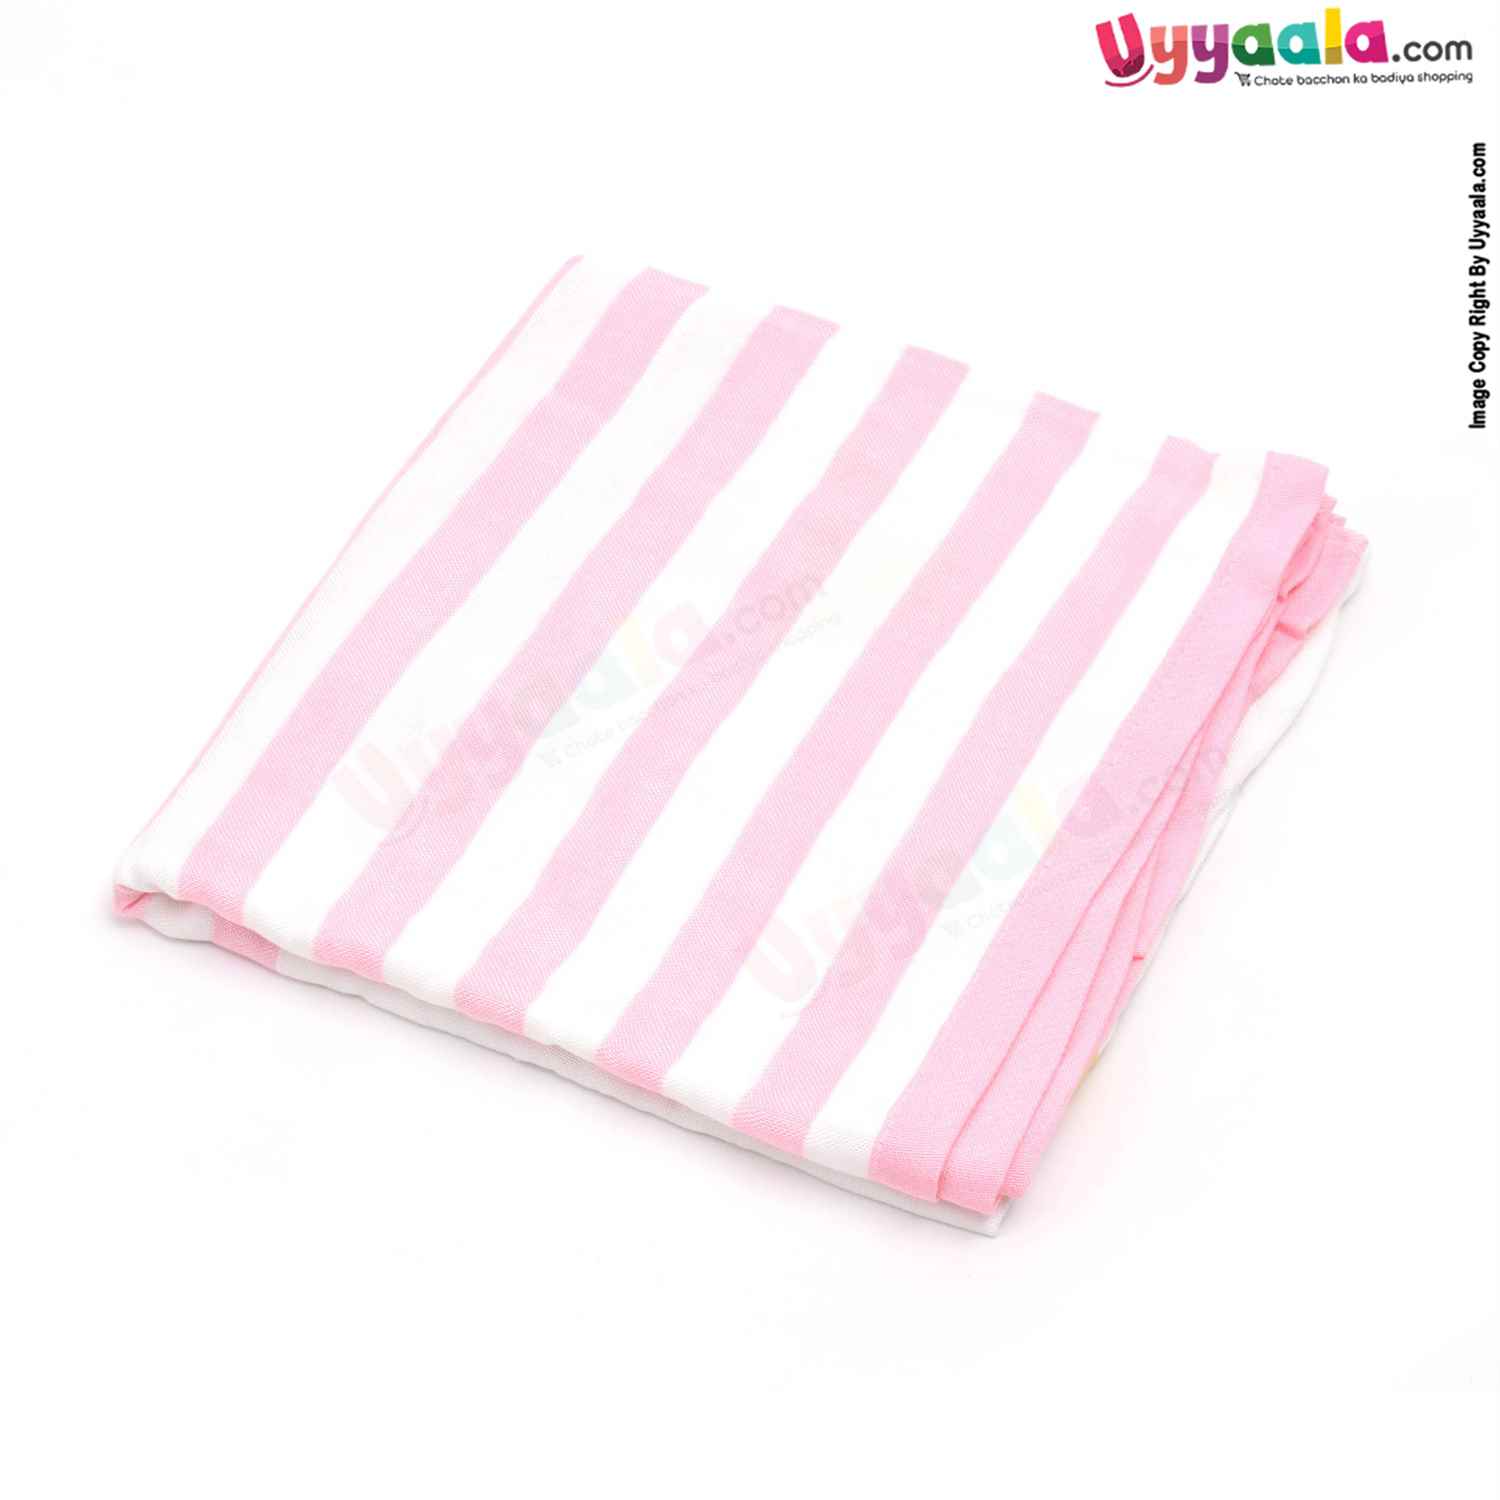 Double Layered Muslin Wrapper with Stripes Print for Babies 0-12m Age, Size(113*105cm)- White & Pink